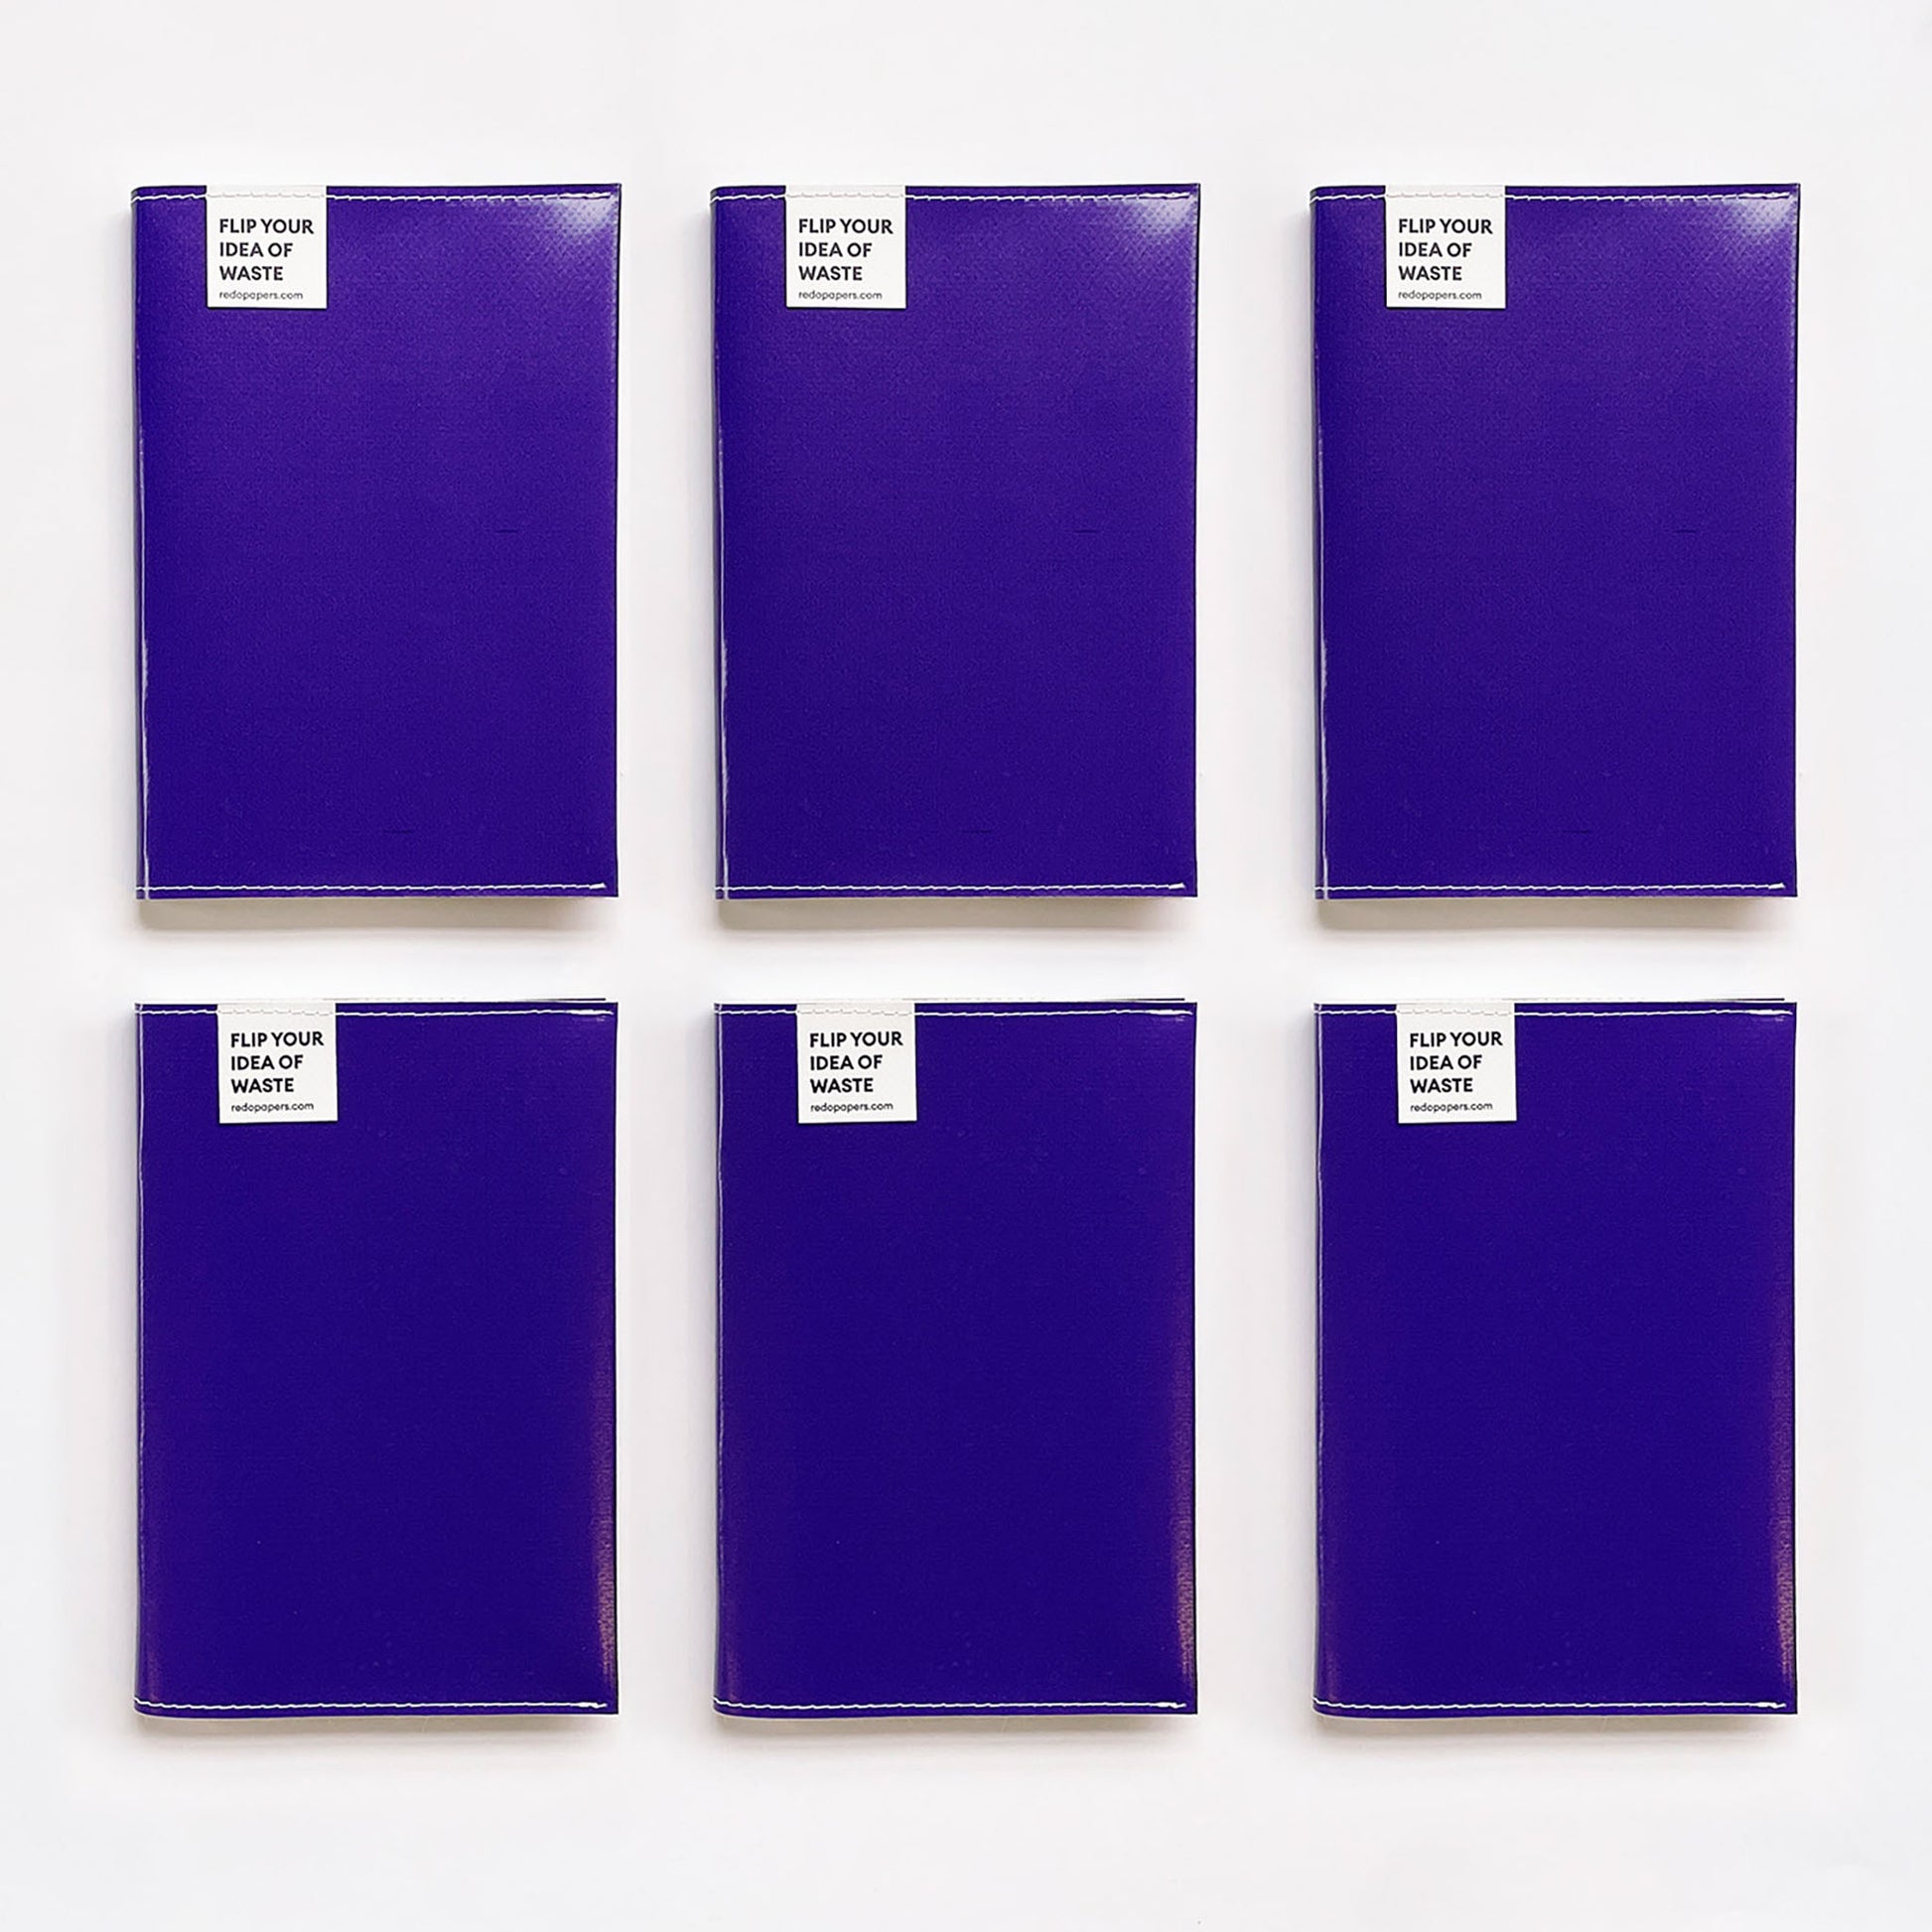 Redopapers notebook with monochrome purple cover